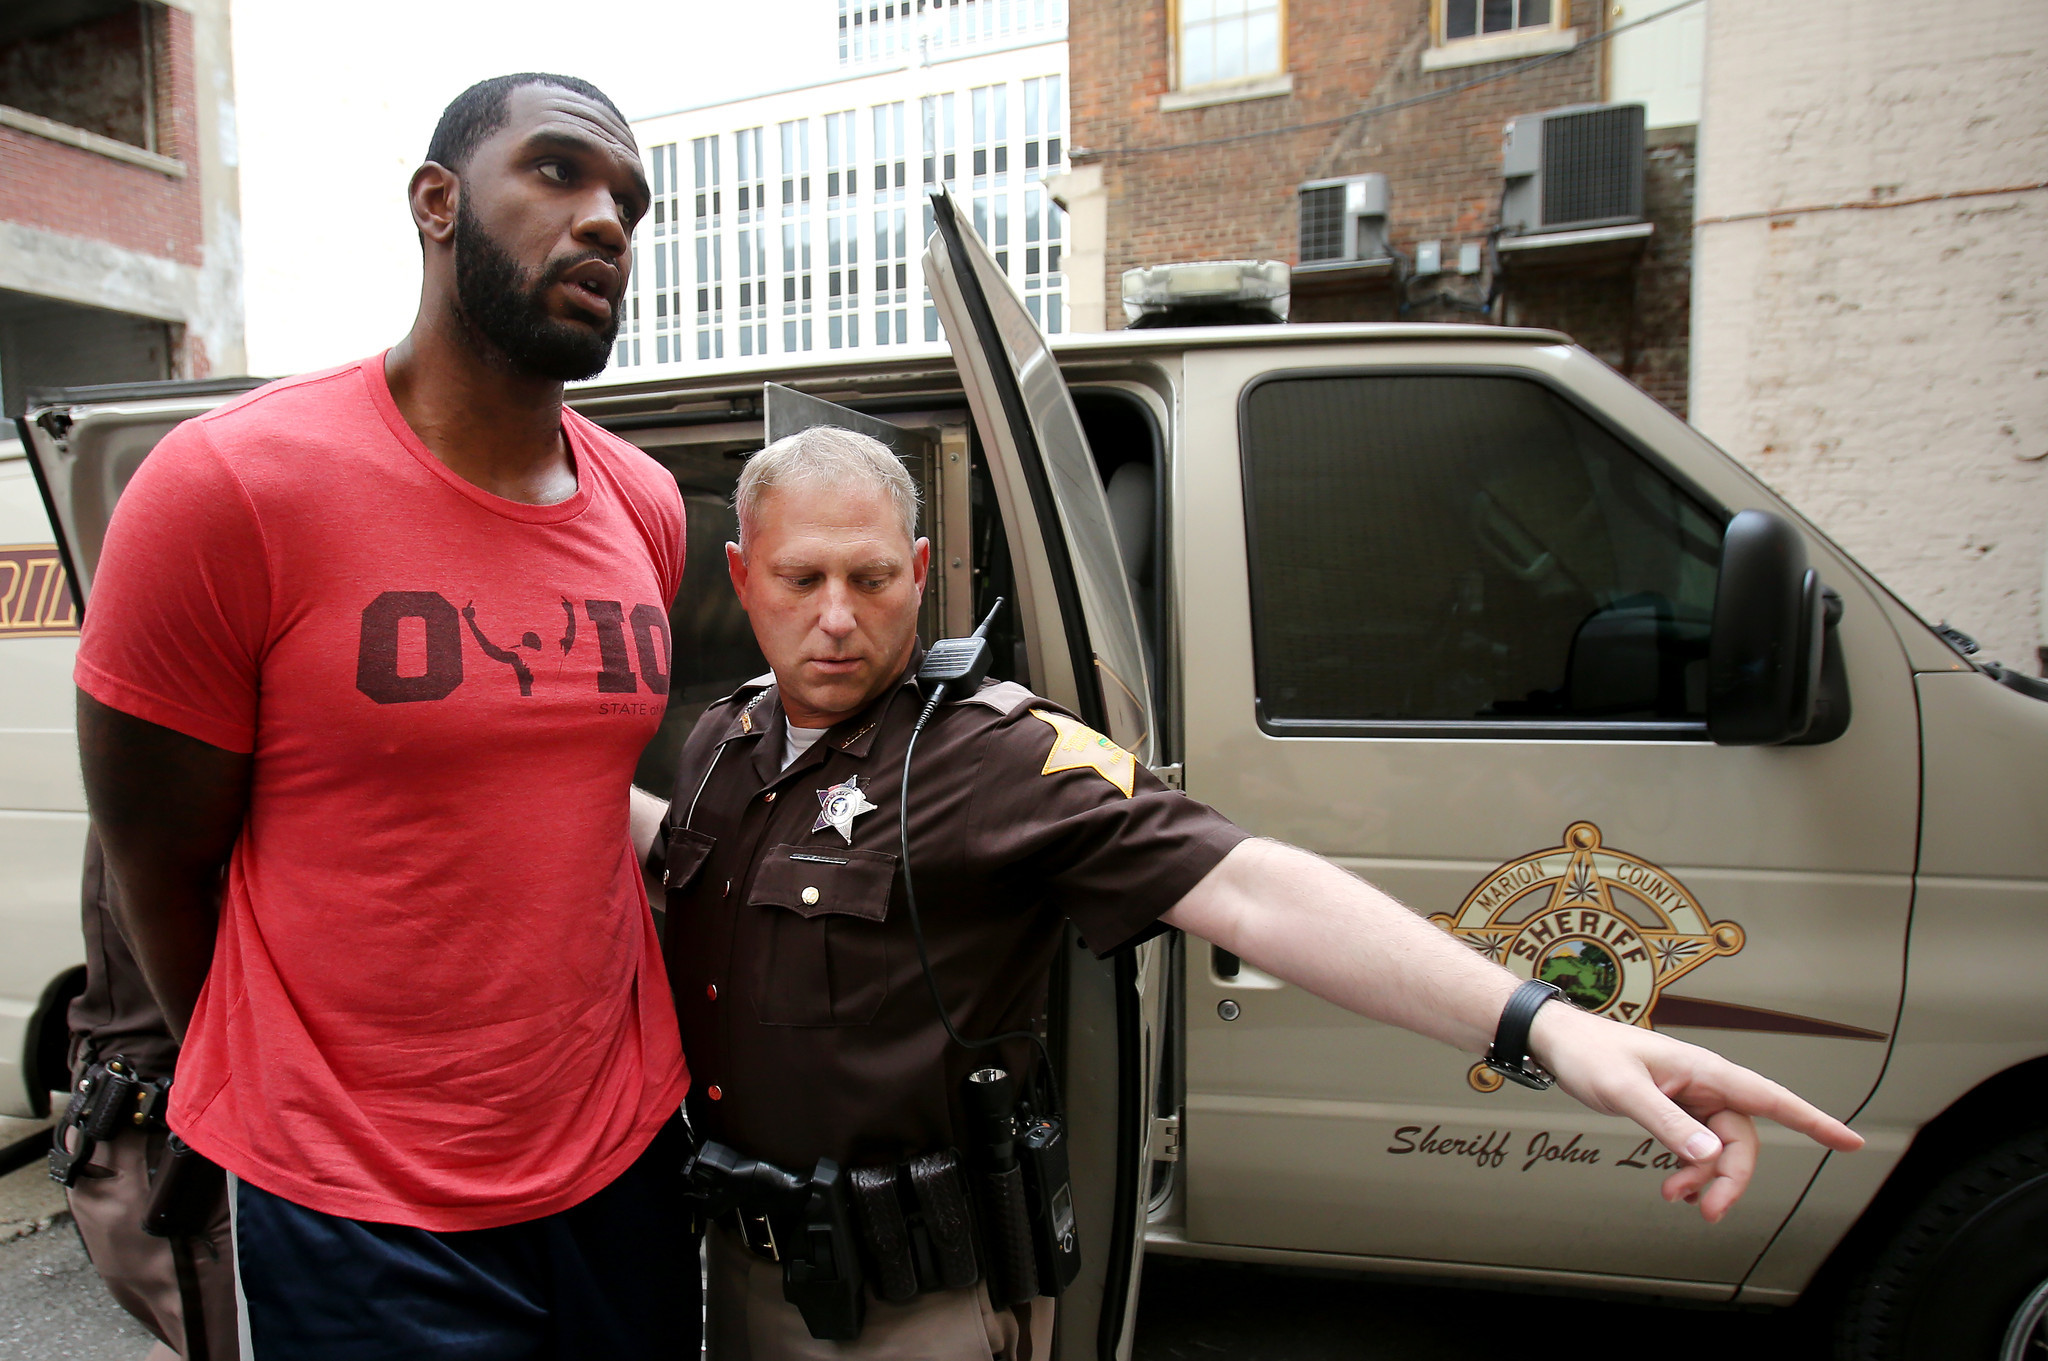 Greg Oden accused of breaking ex-girlfriend's nose during assault - LA Times2048 x 1361